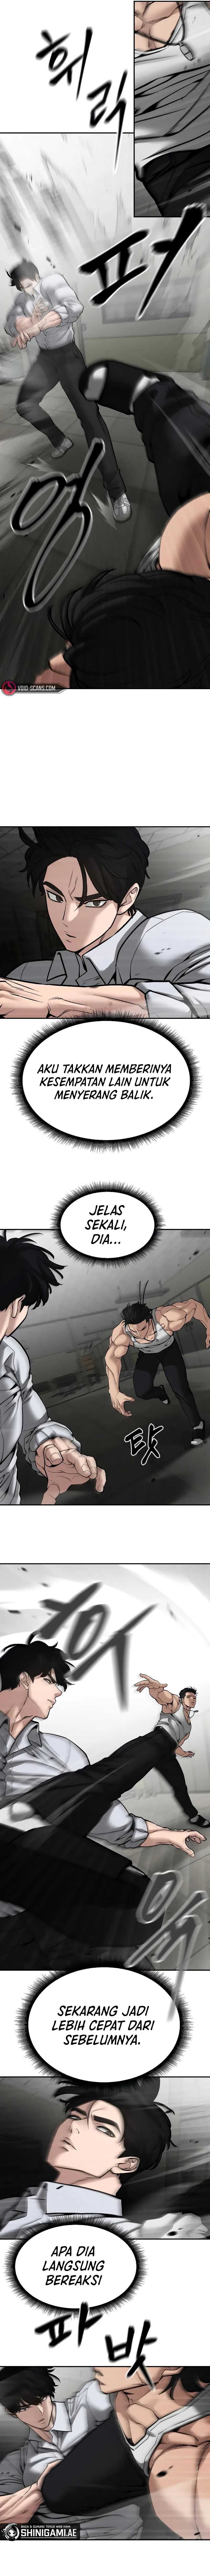 The Bully In Charge Chapter 81